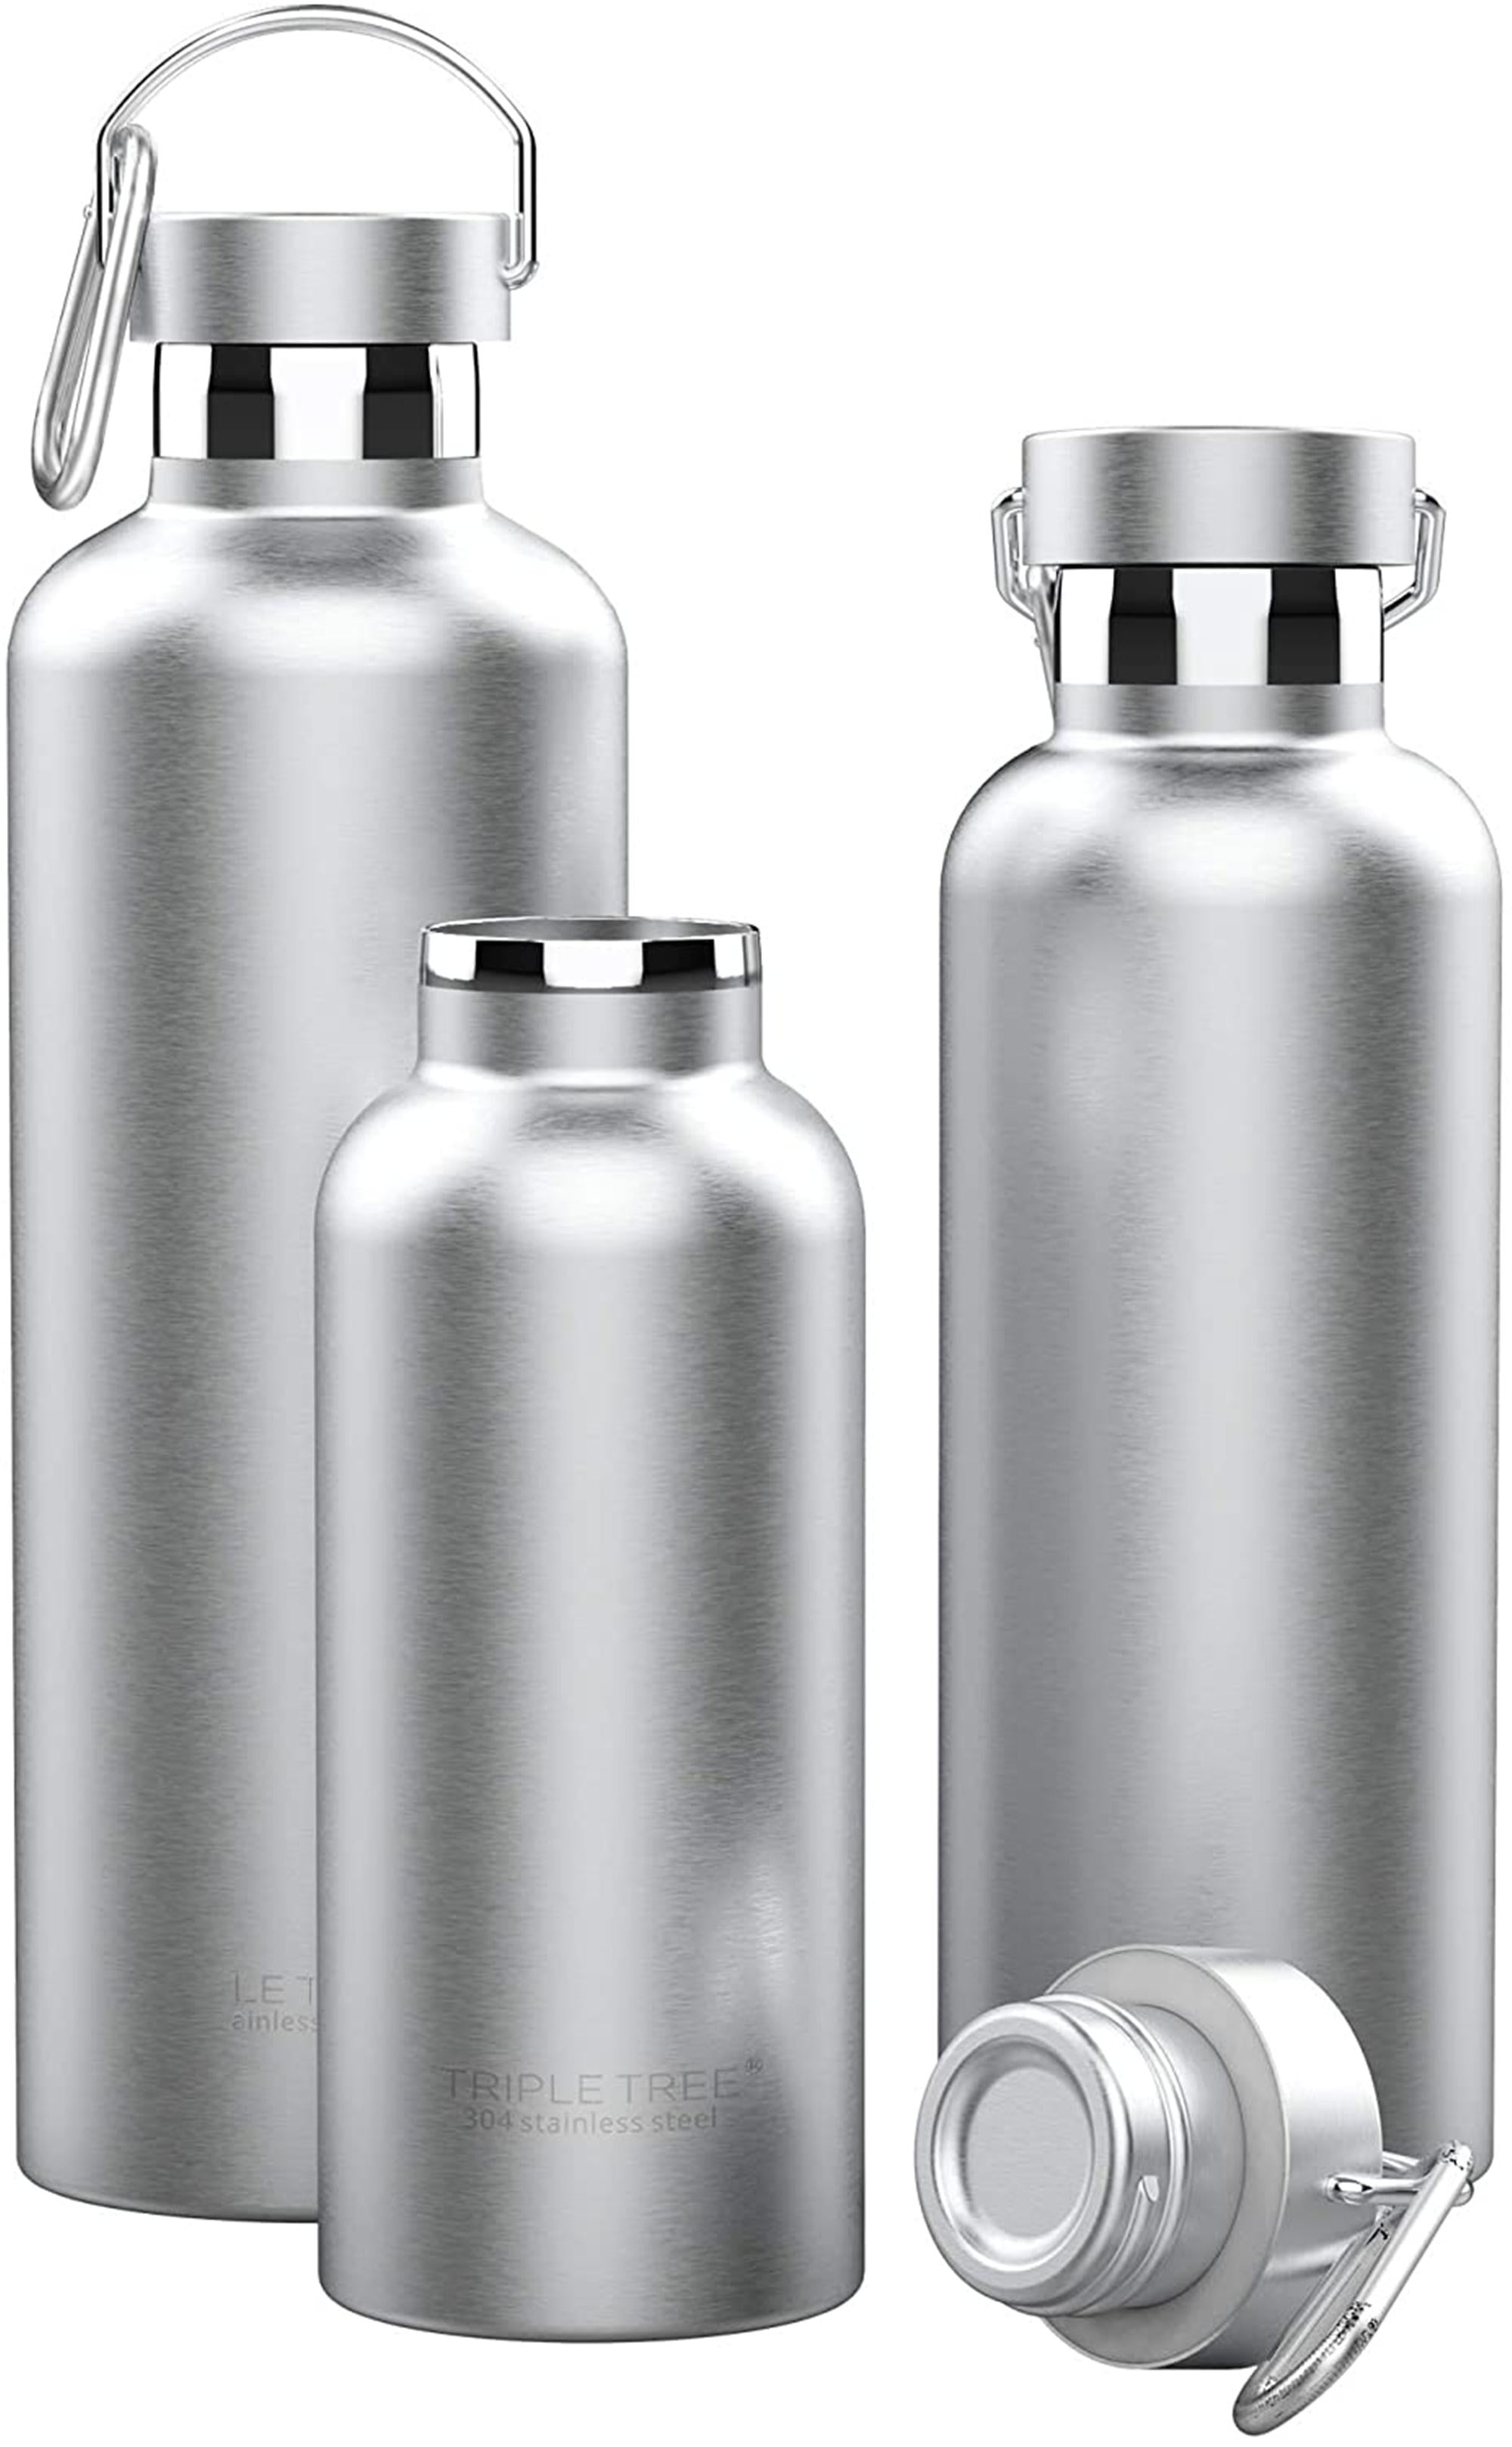 Watersy Triple-Insulated Stainless Steel Water Bottle 17 Ounce /500ml,  Powder Coat Insulated Water Bottles, Keeps Hot and Cold, 100% Leakproof  Lids, Sweatproof Water Bottles, Great for Travel, Picnic& Camping.dark blue